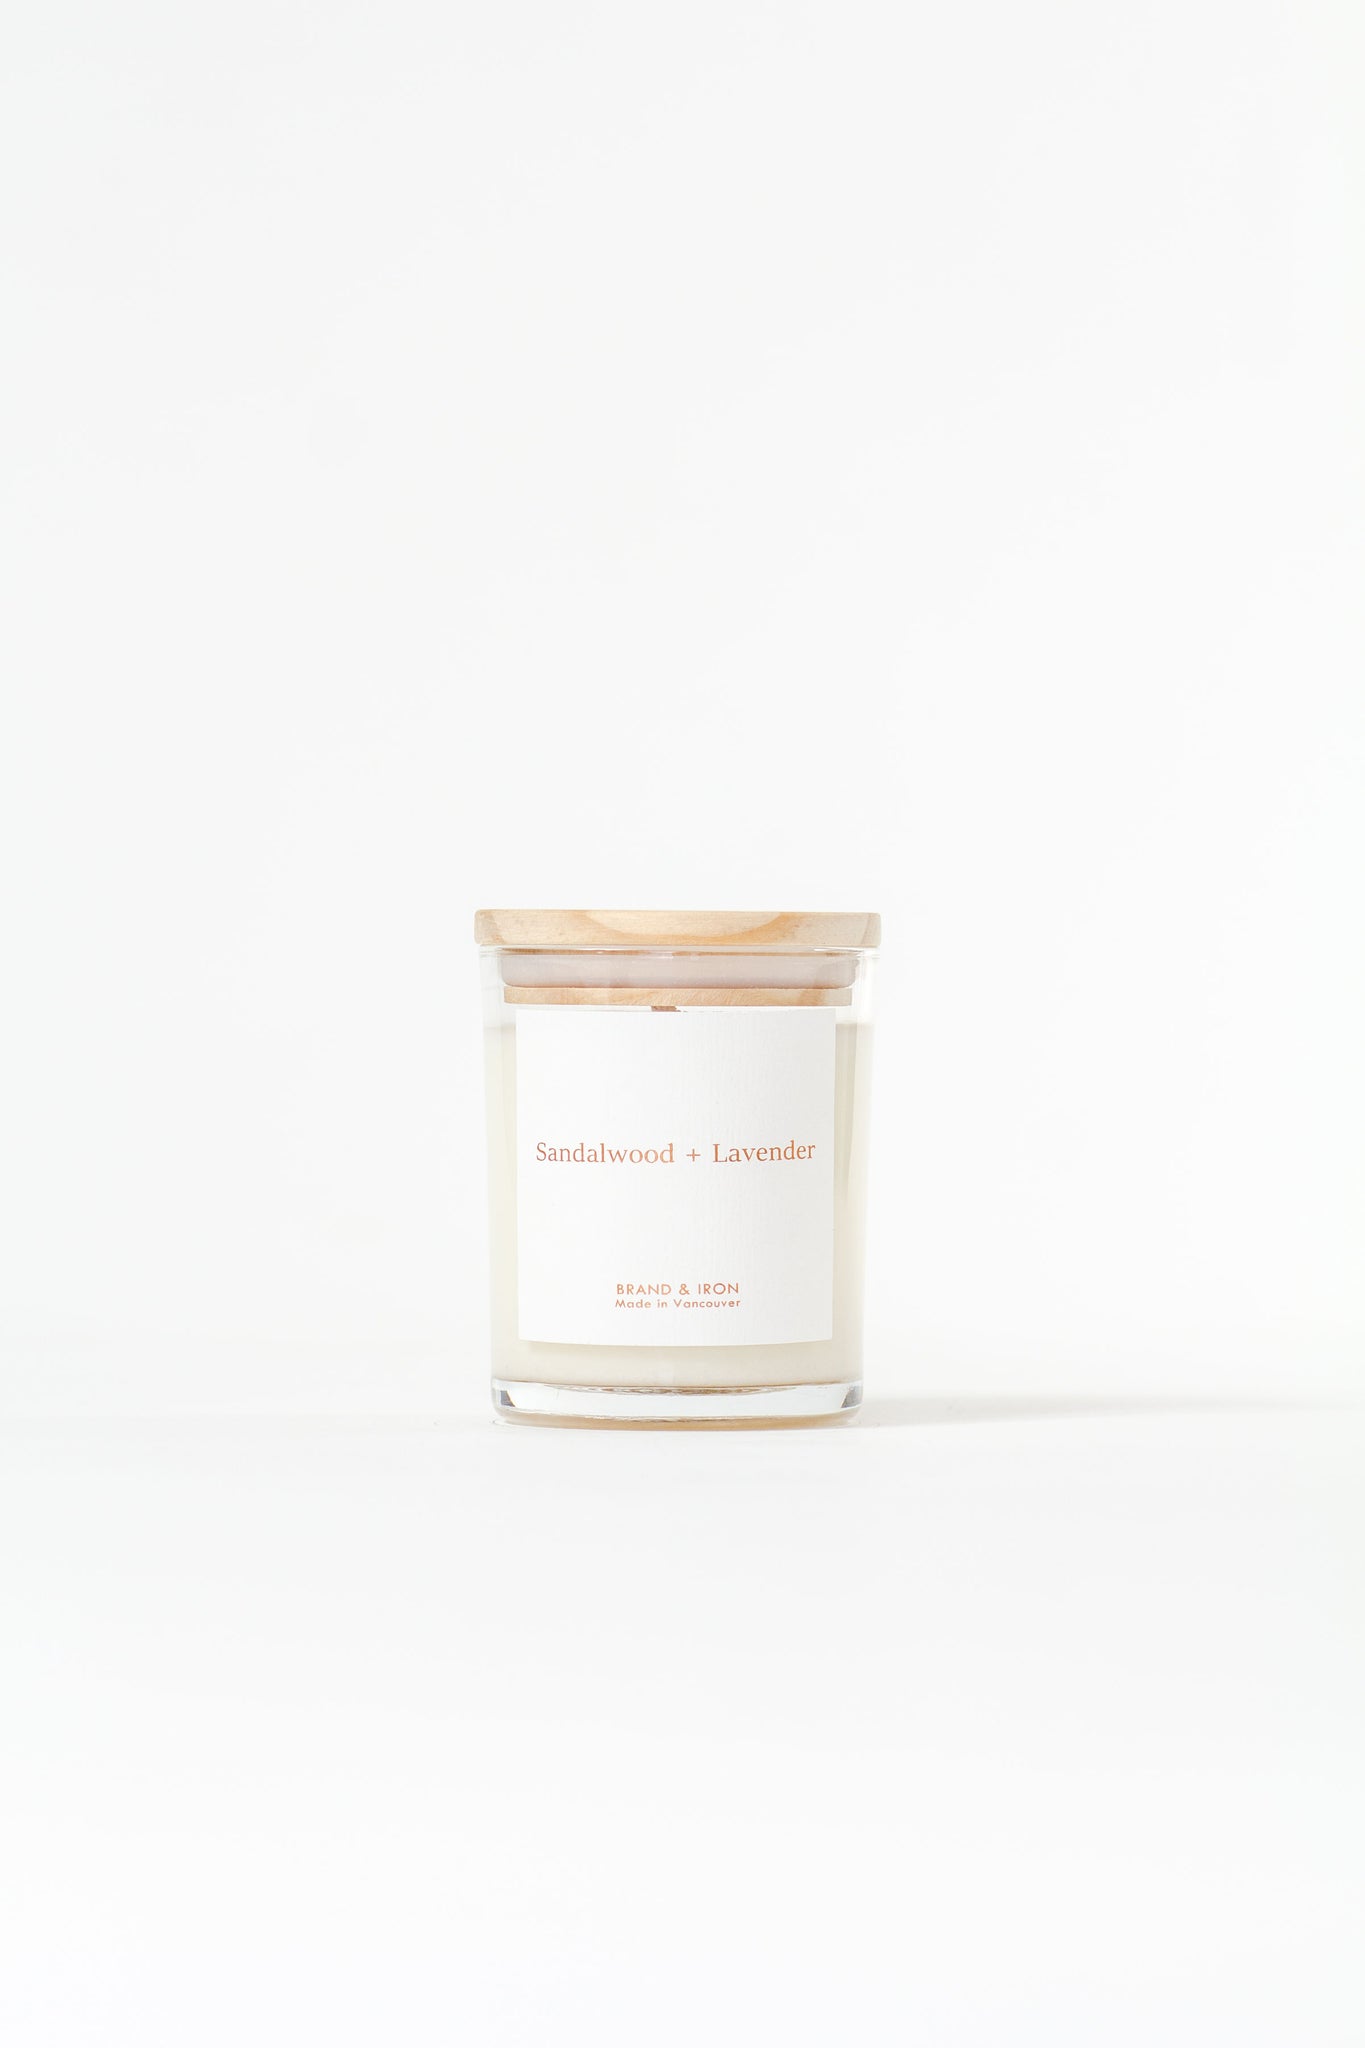 Sandalwood + Lavender Candle | Brand and Iron